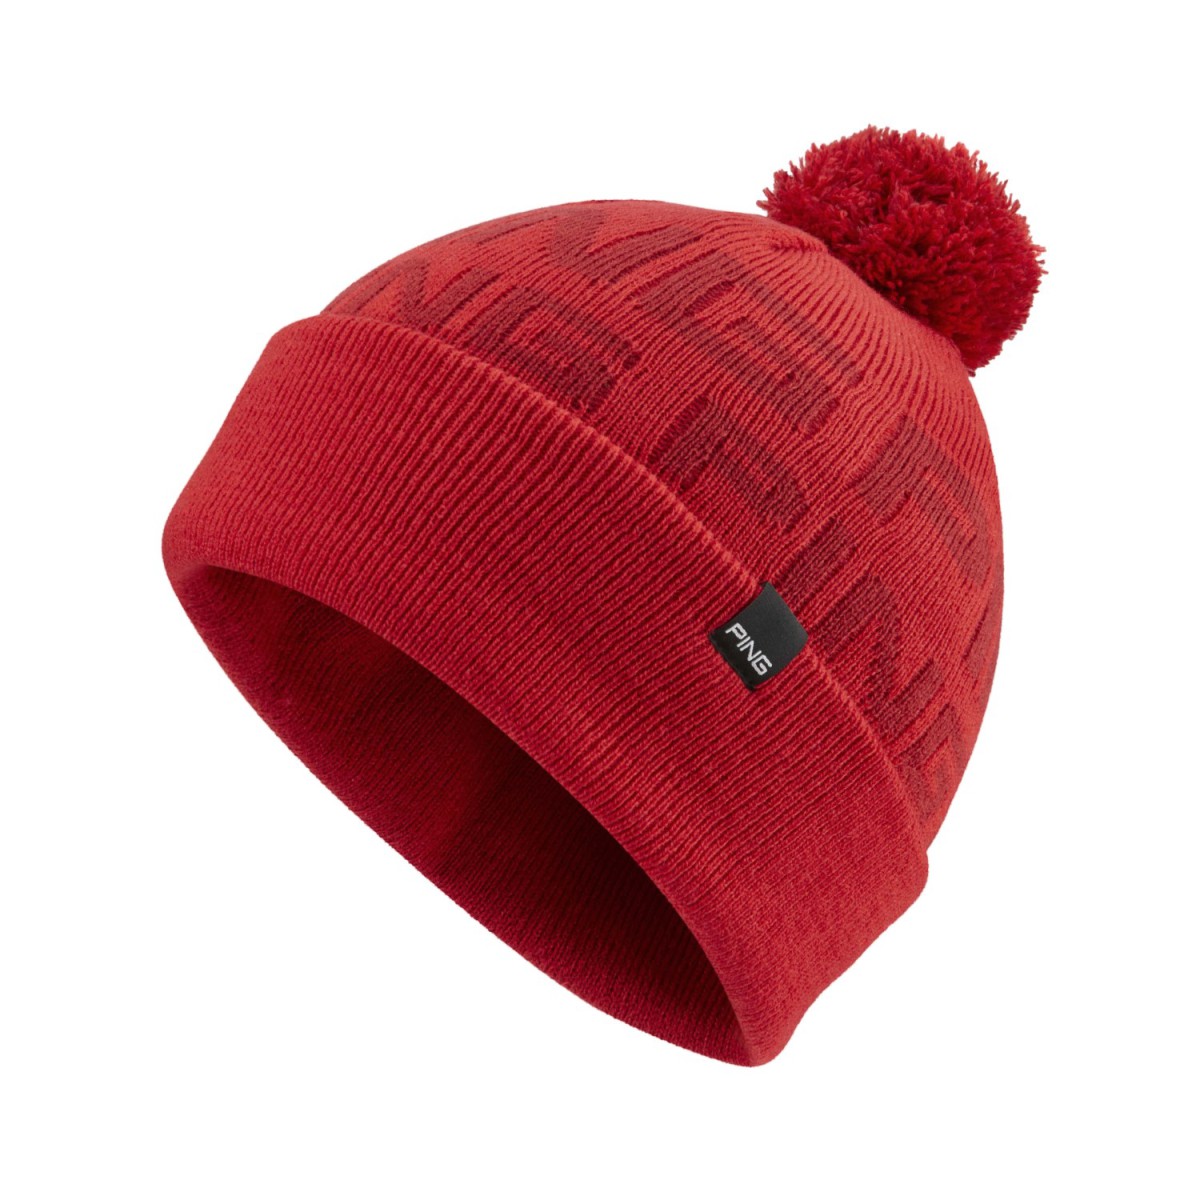 Ping muts bobble bright red